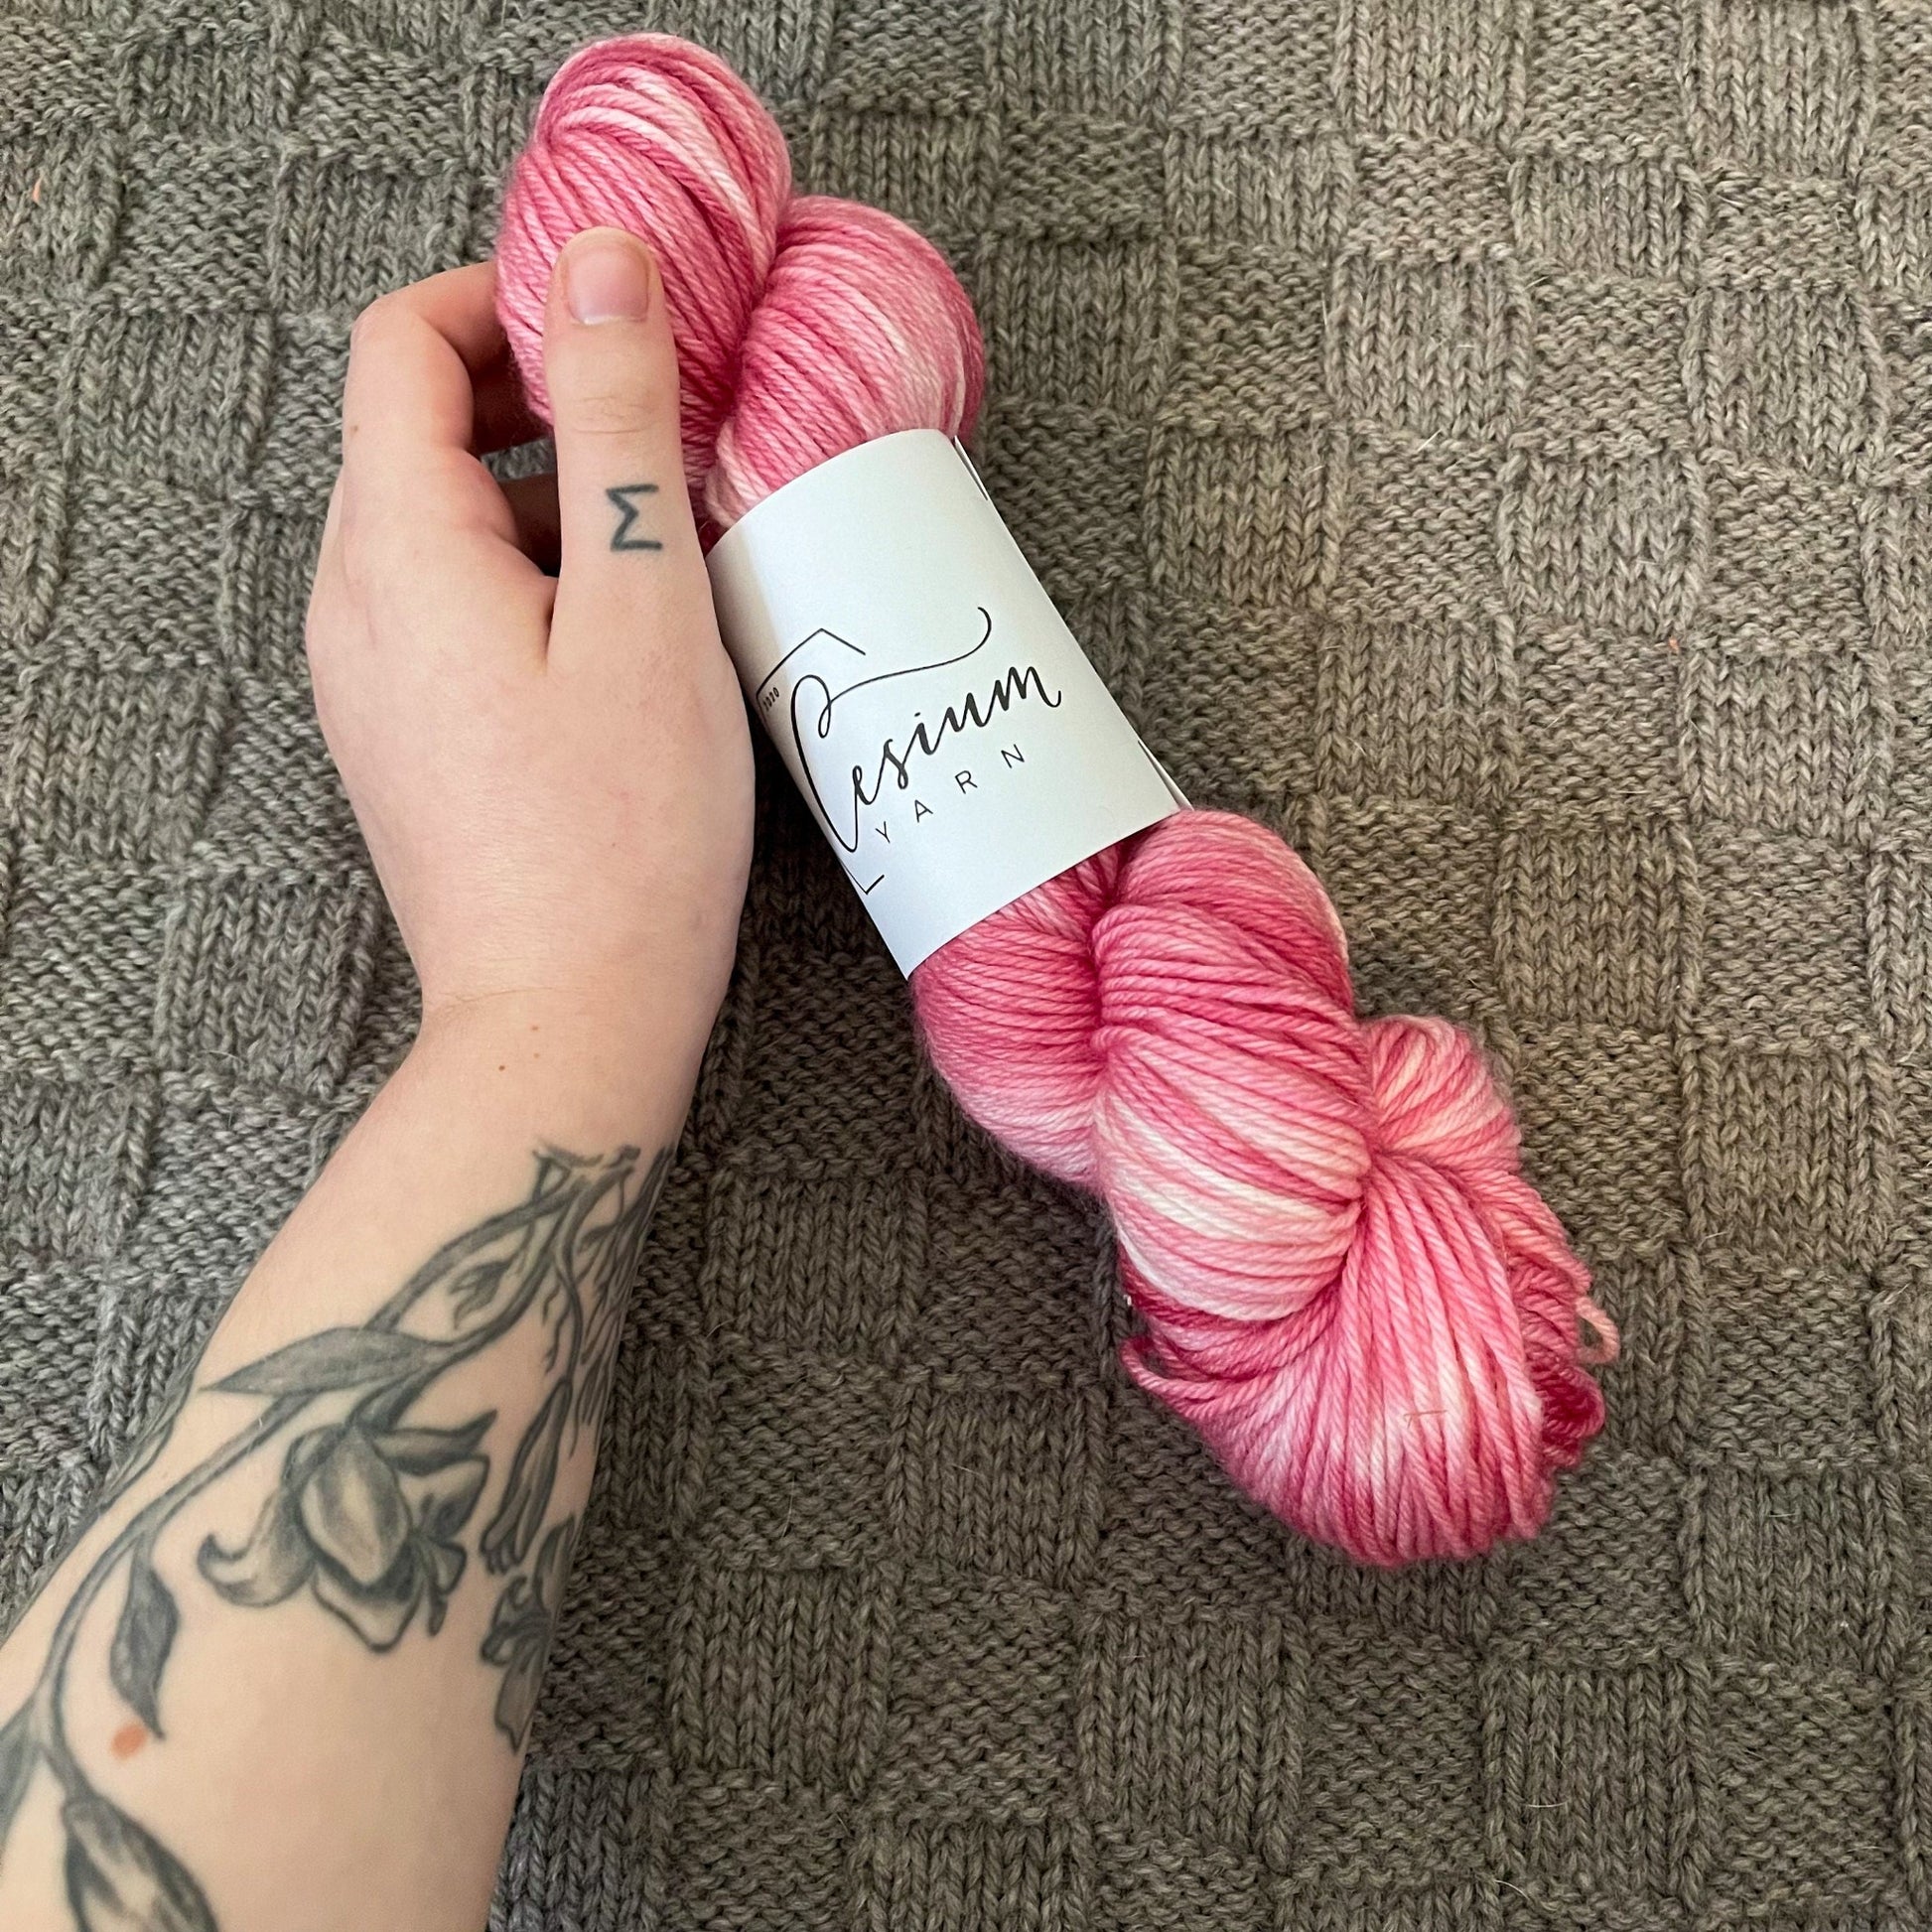 Cat holds a skein of pink and white hand-dyed yarn.